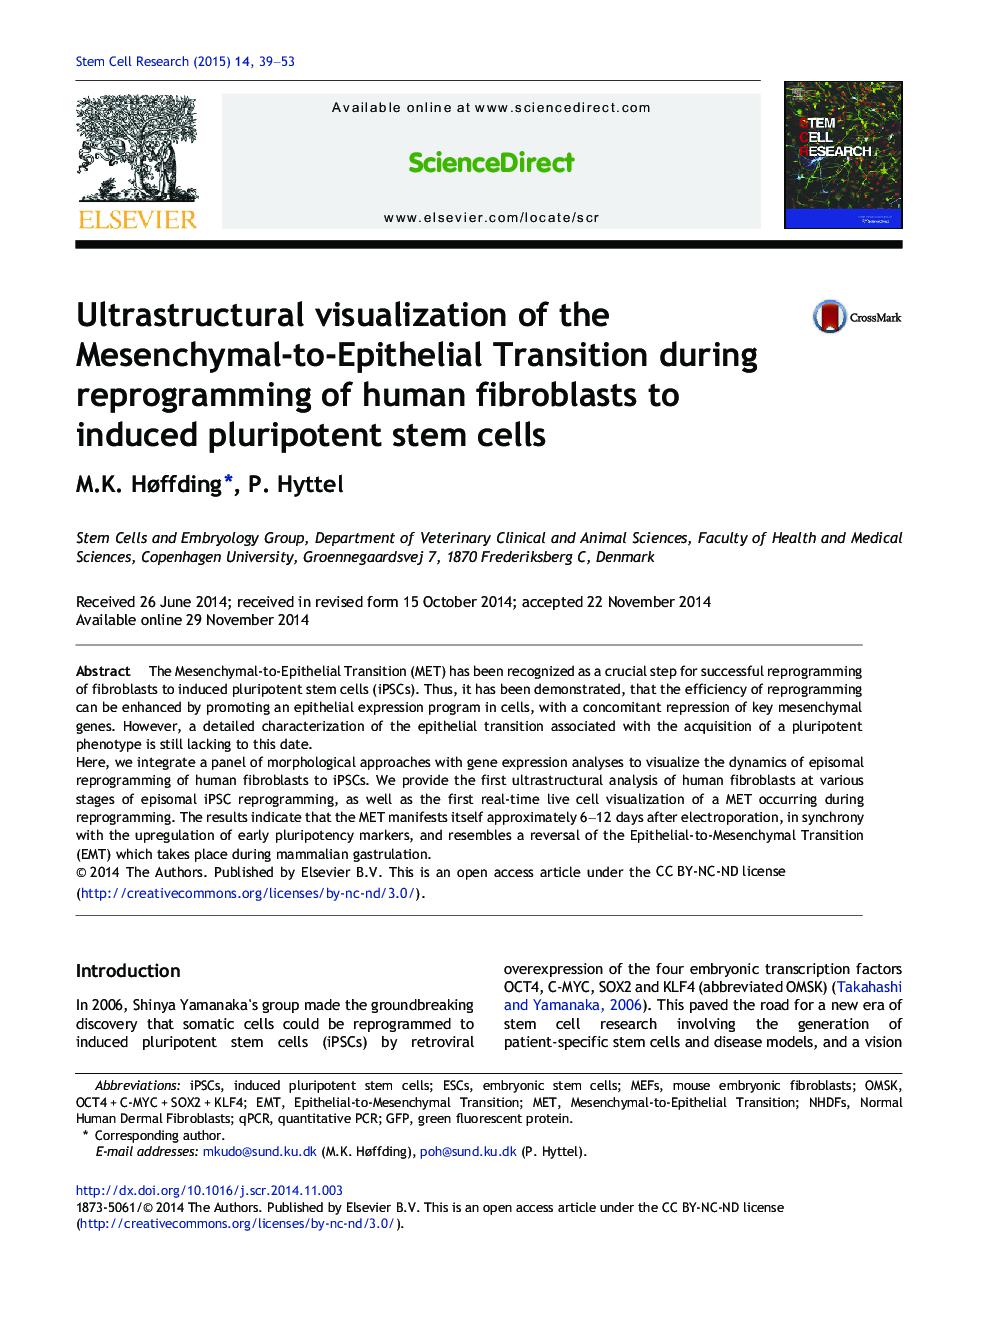 Ultrastructural visualization of the Mesenchymal-to-Epithelial Transition during reprogramming of human fibroblasts to induced pluripotent stem cells